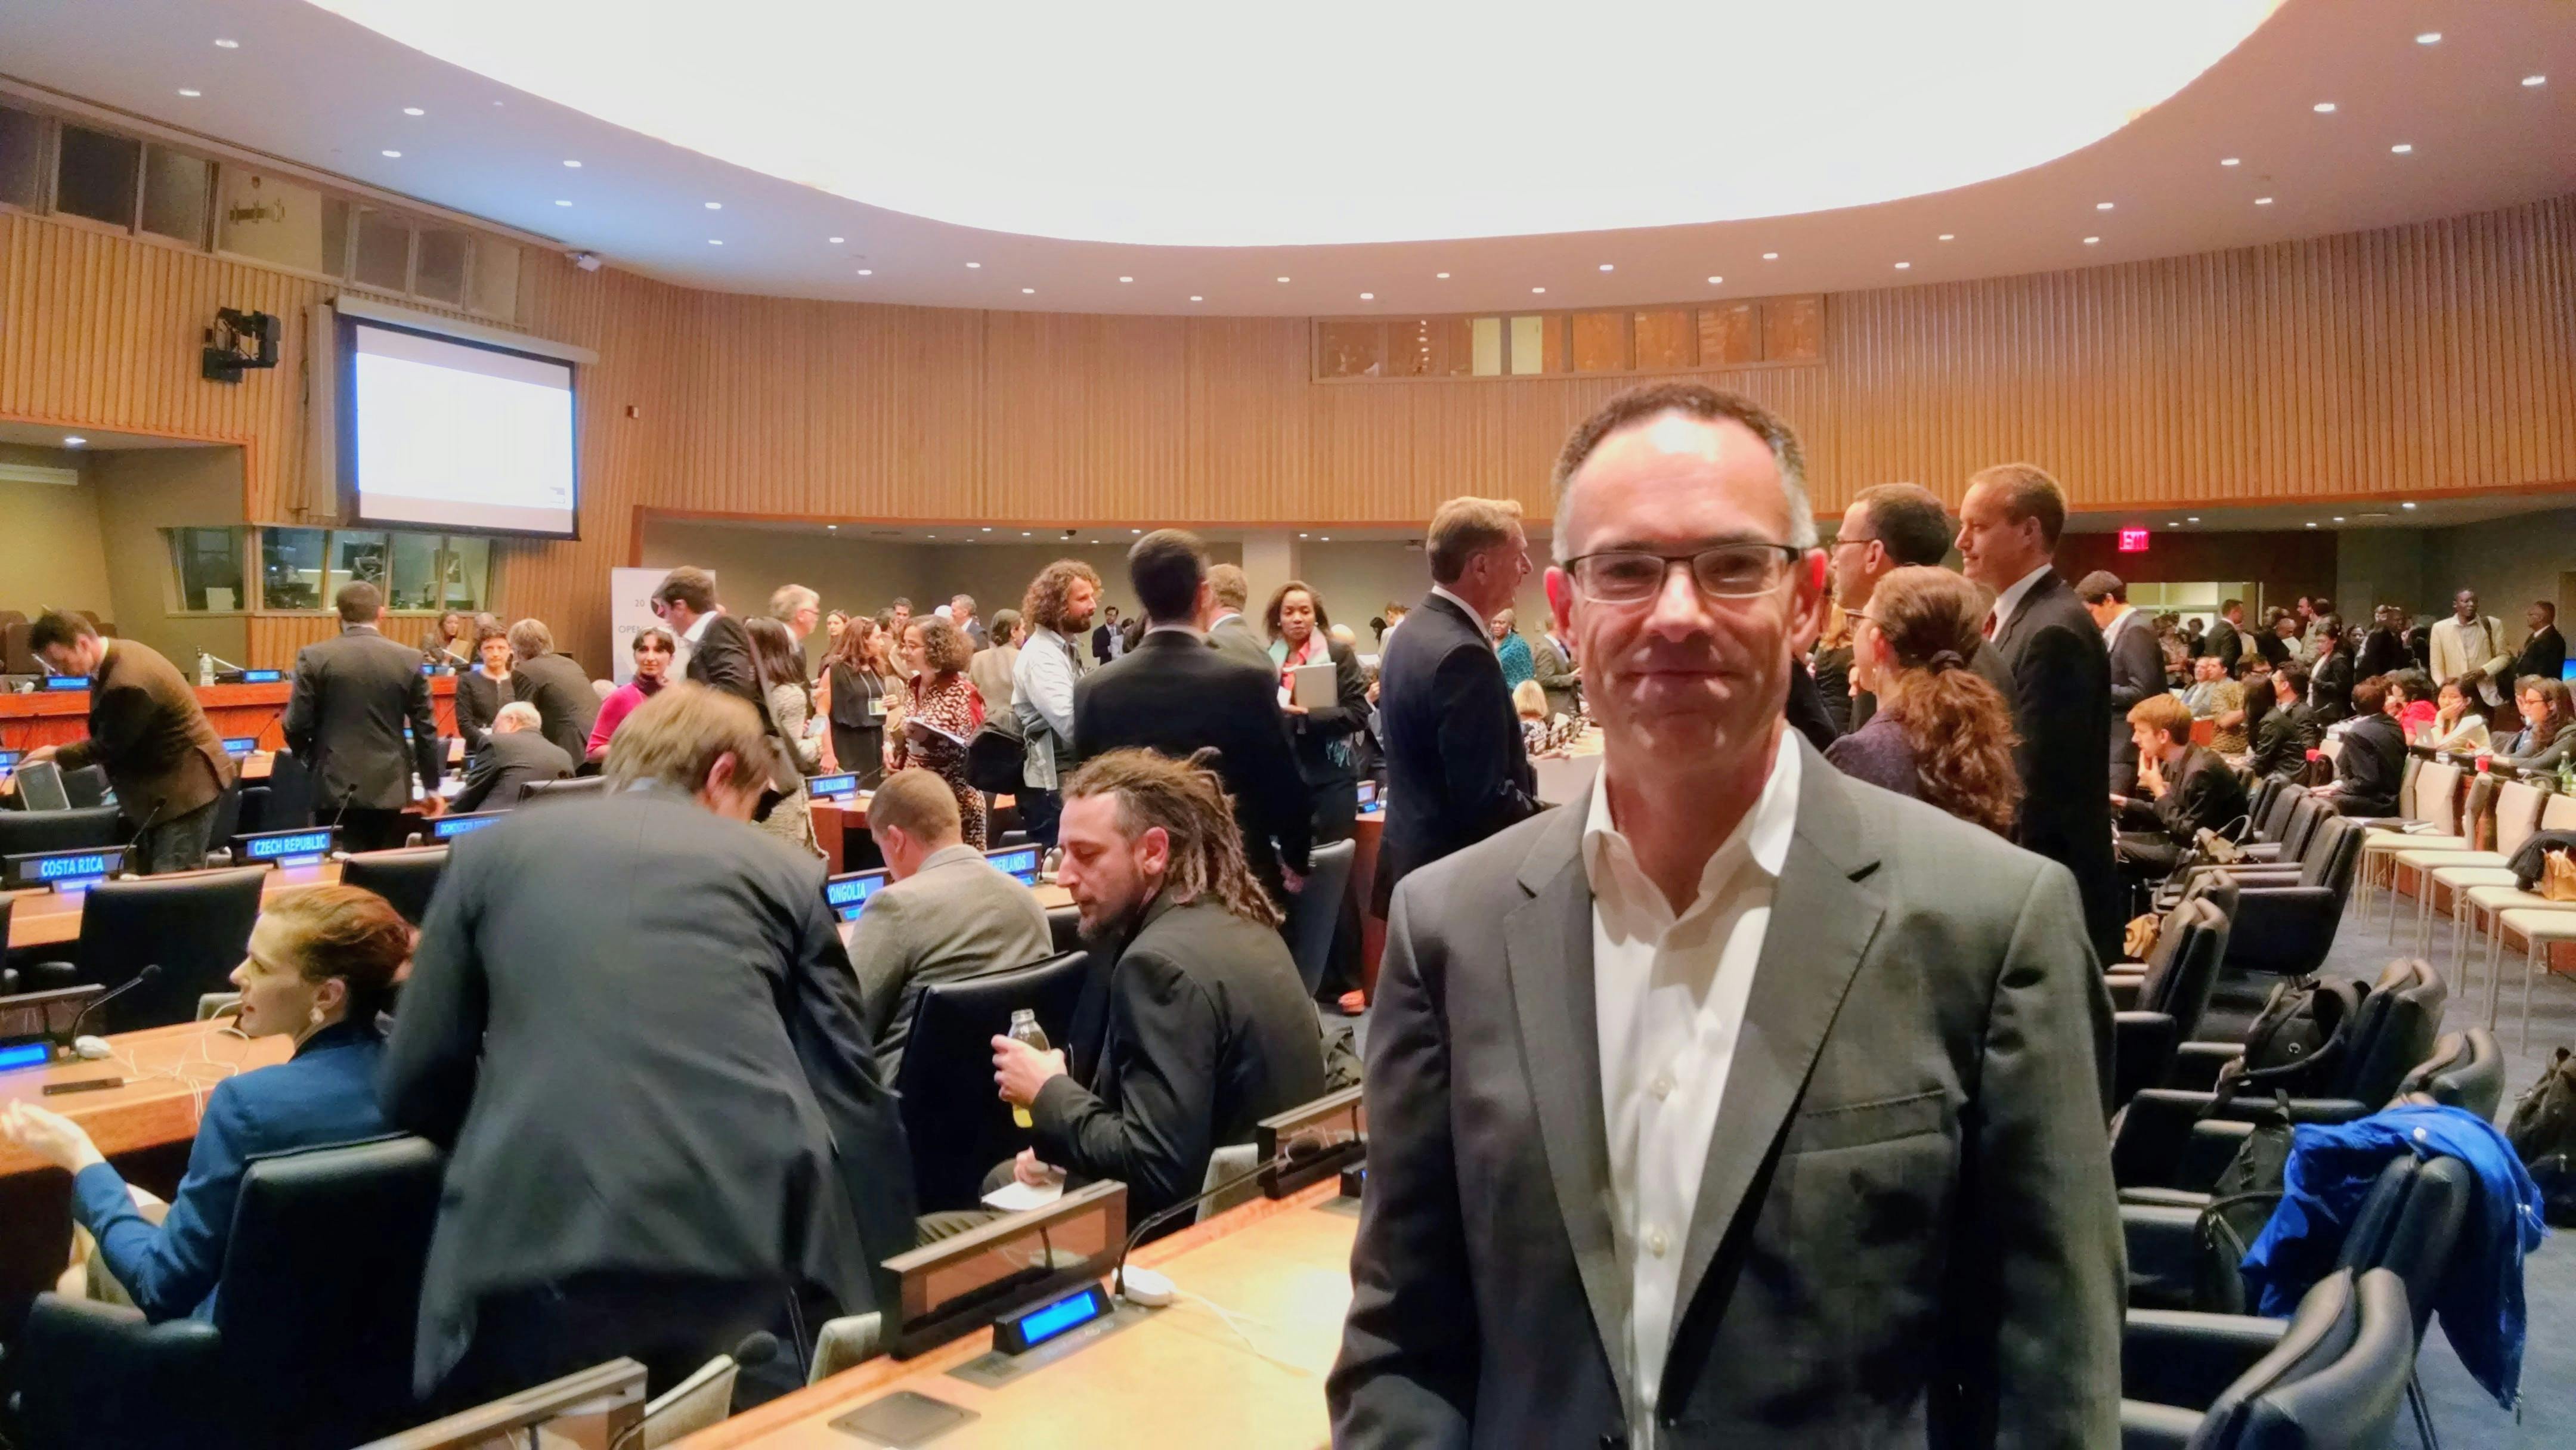 A photo of me in a large conference room at the United Nations headquarters